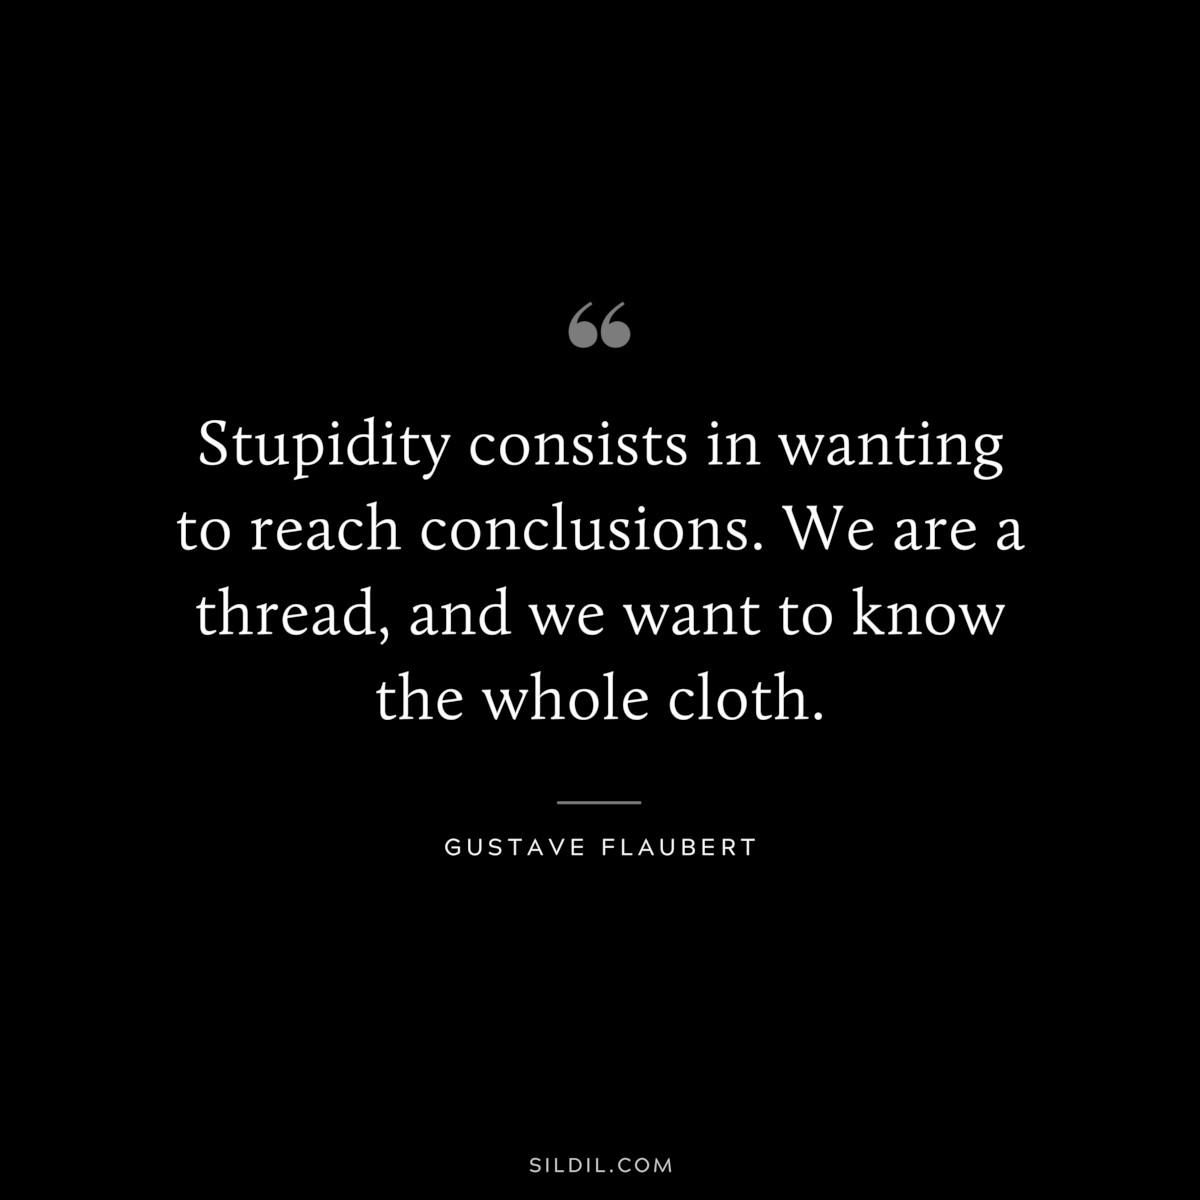 Stupidity consists in wanting to reach conclusions. We are a thread, and we want to know the whole cloth. ― Gustave Flaubert